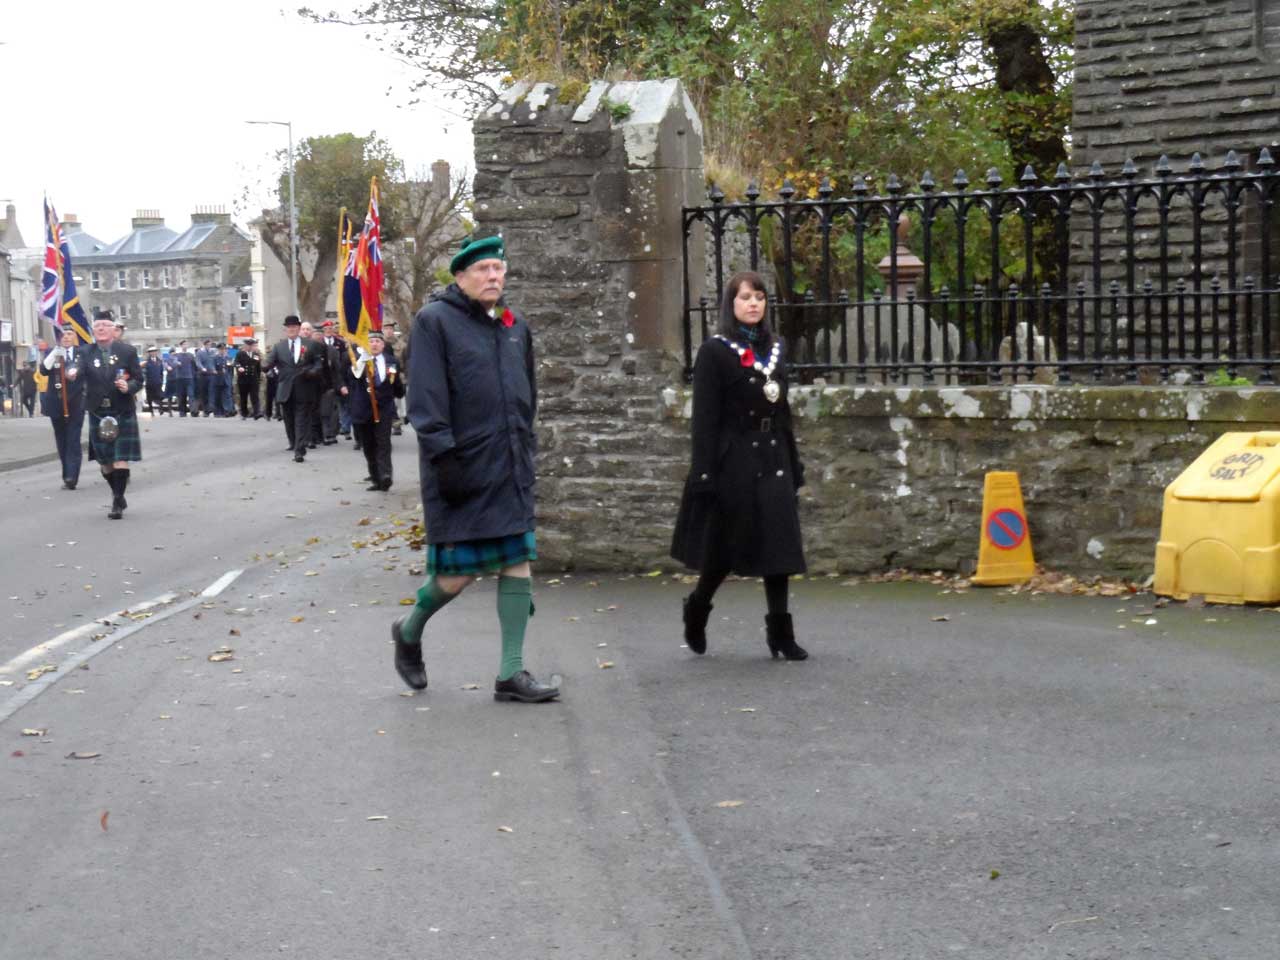 Photo: Remembrance In Caithness 2015